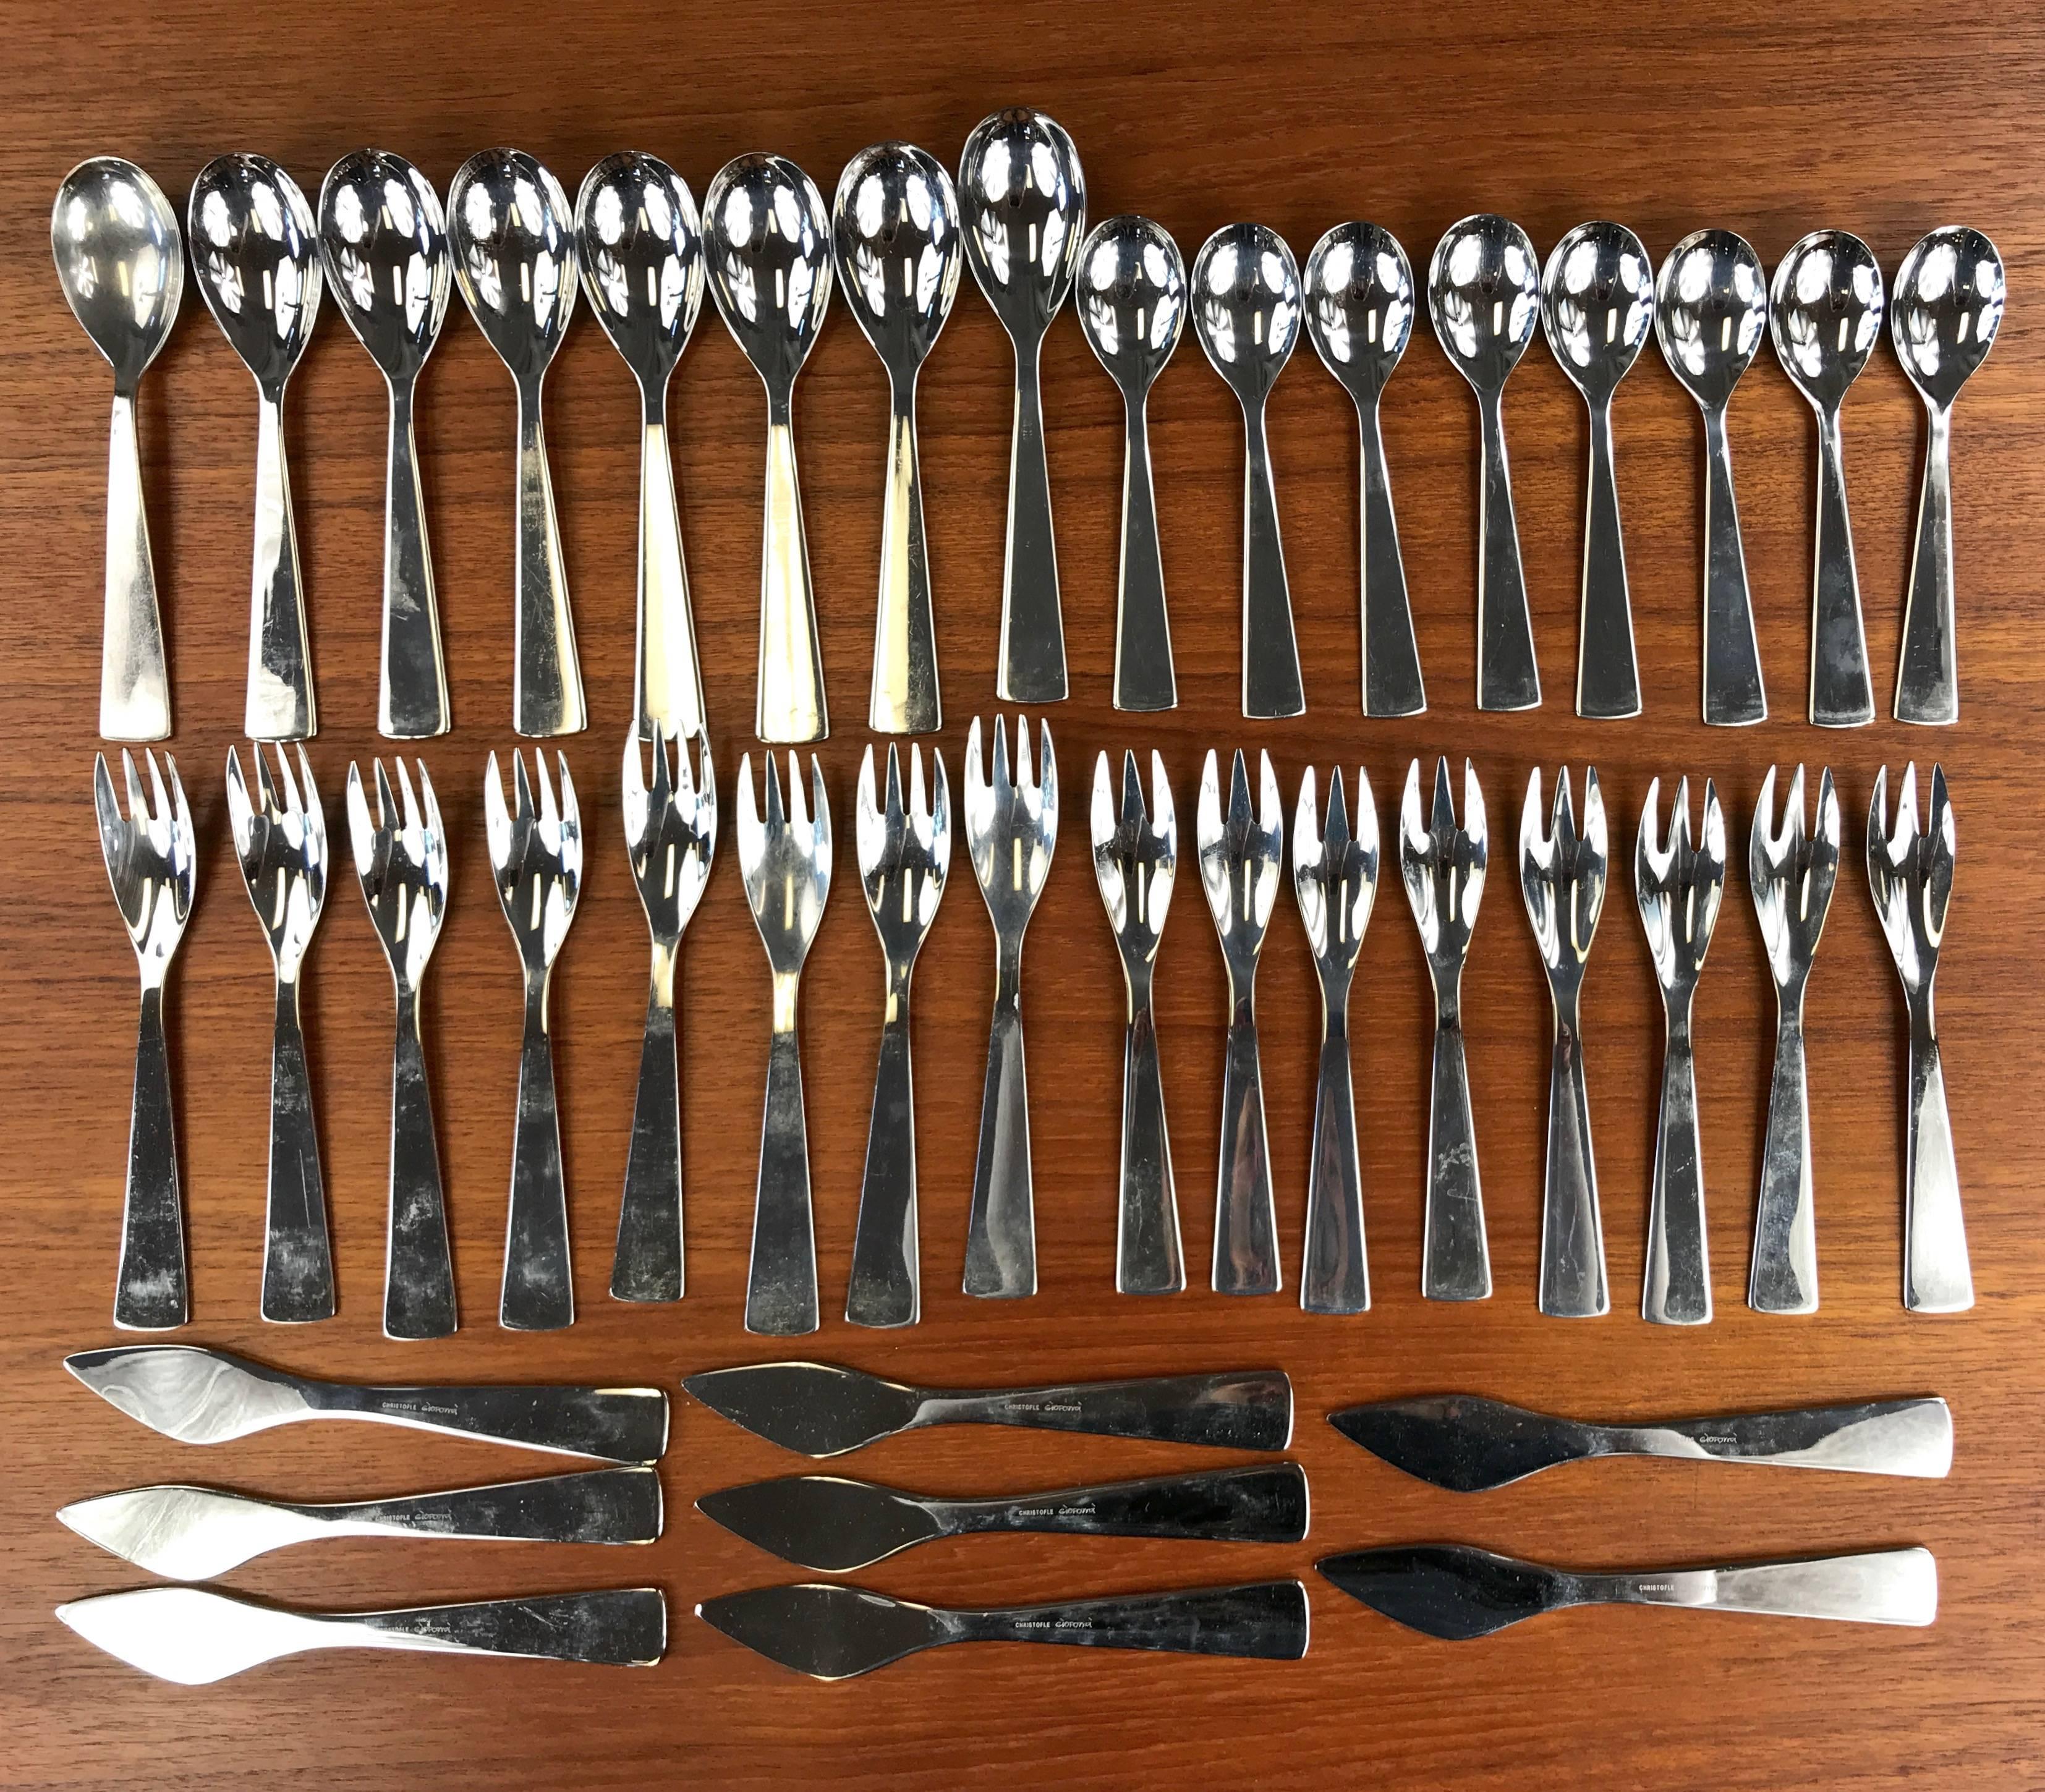 A “Ponti 400” 40-piece stainless steel flatware service for eight by Gio Ponti and produced by Christofle.

Designed in 1951 for Fraser Krupp, the pattern has fabulous modernist lines and displays Ponti’s talent for imbuing geometric forms with